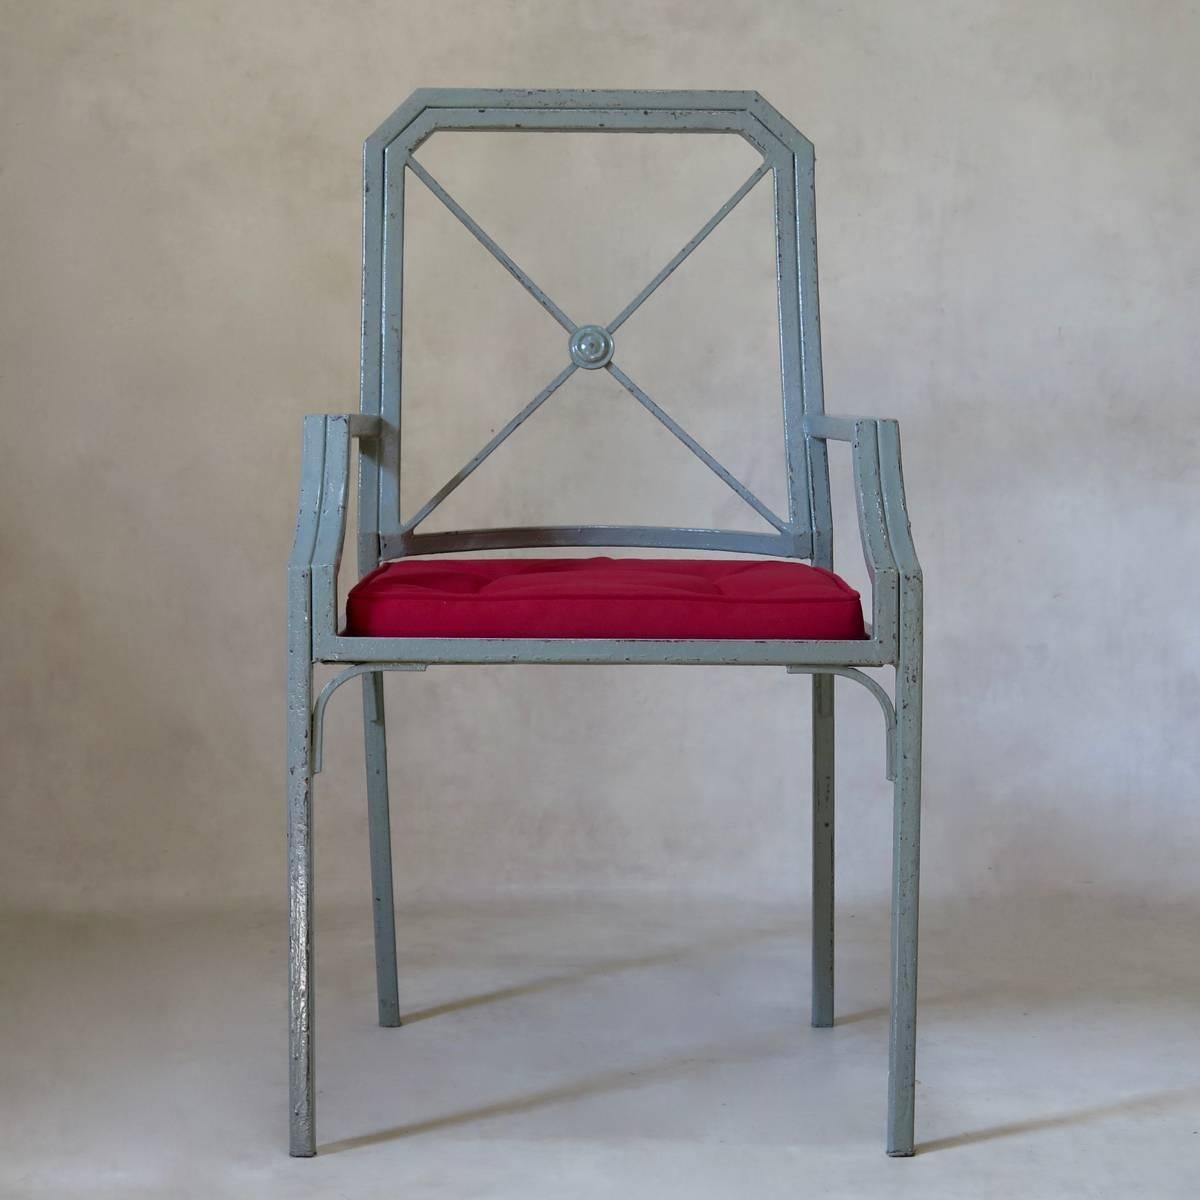 Set of four elegant Directoire-inspired iron chairs, painted grey, with red canvas seats. Very sturdy.